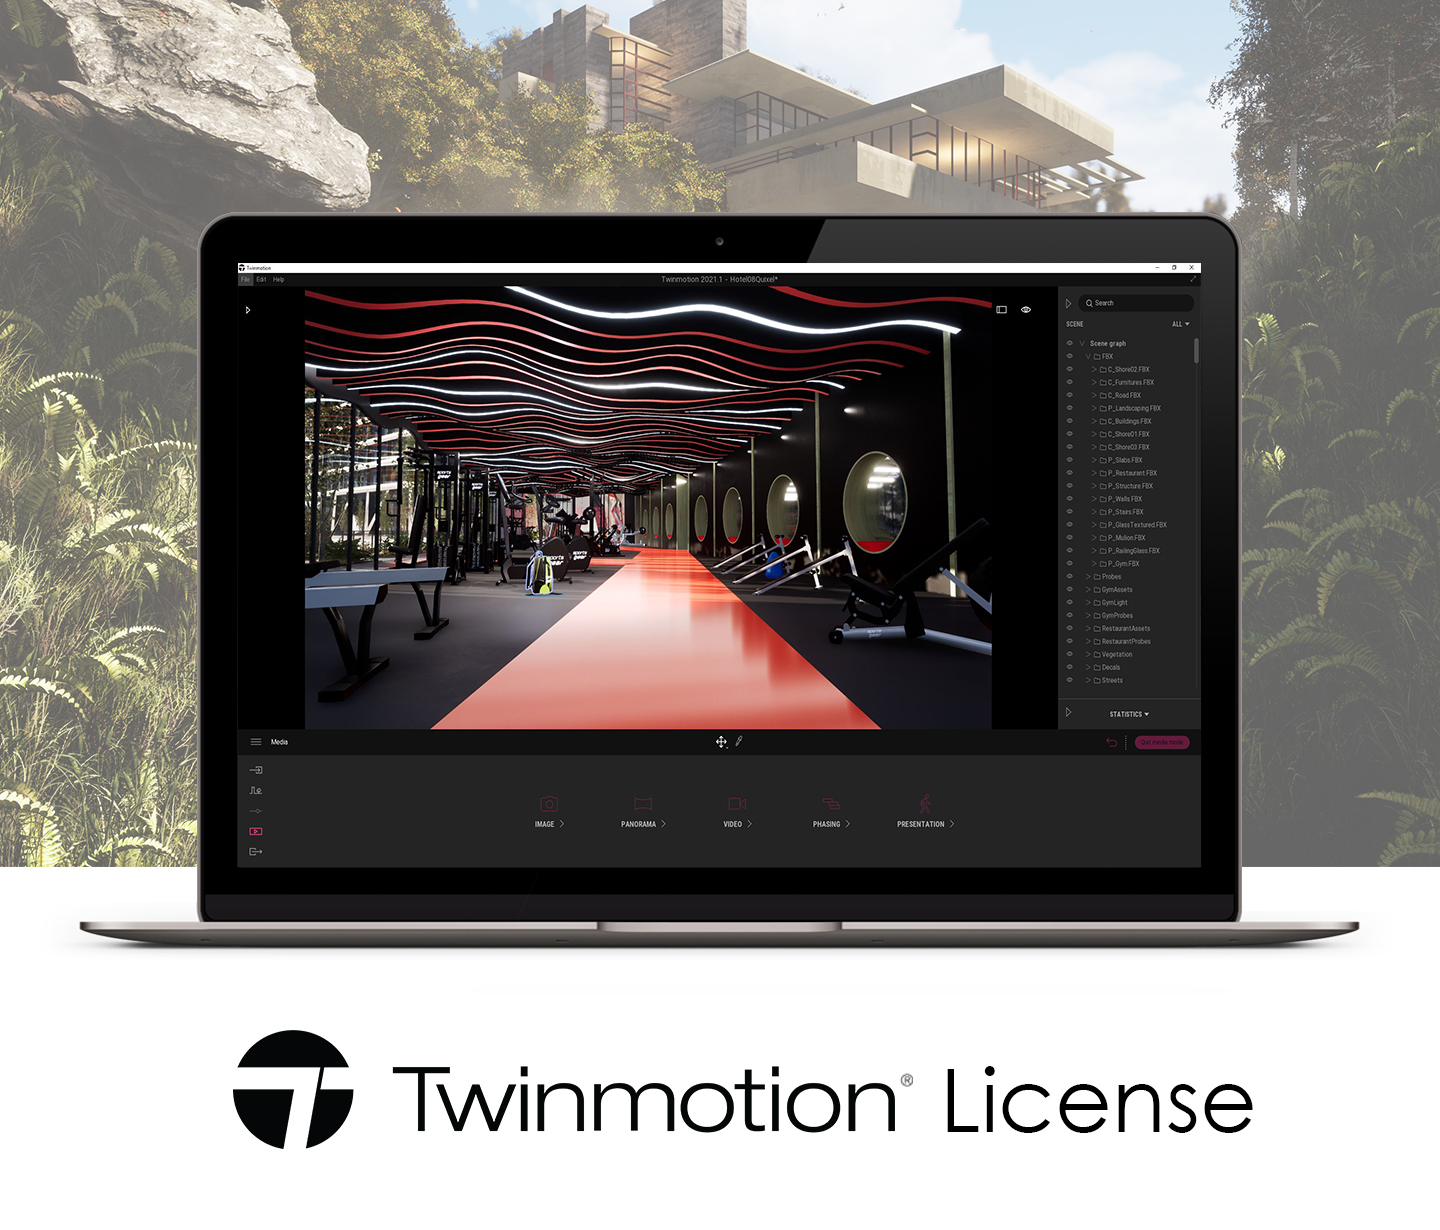 twinmotion software release date